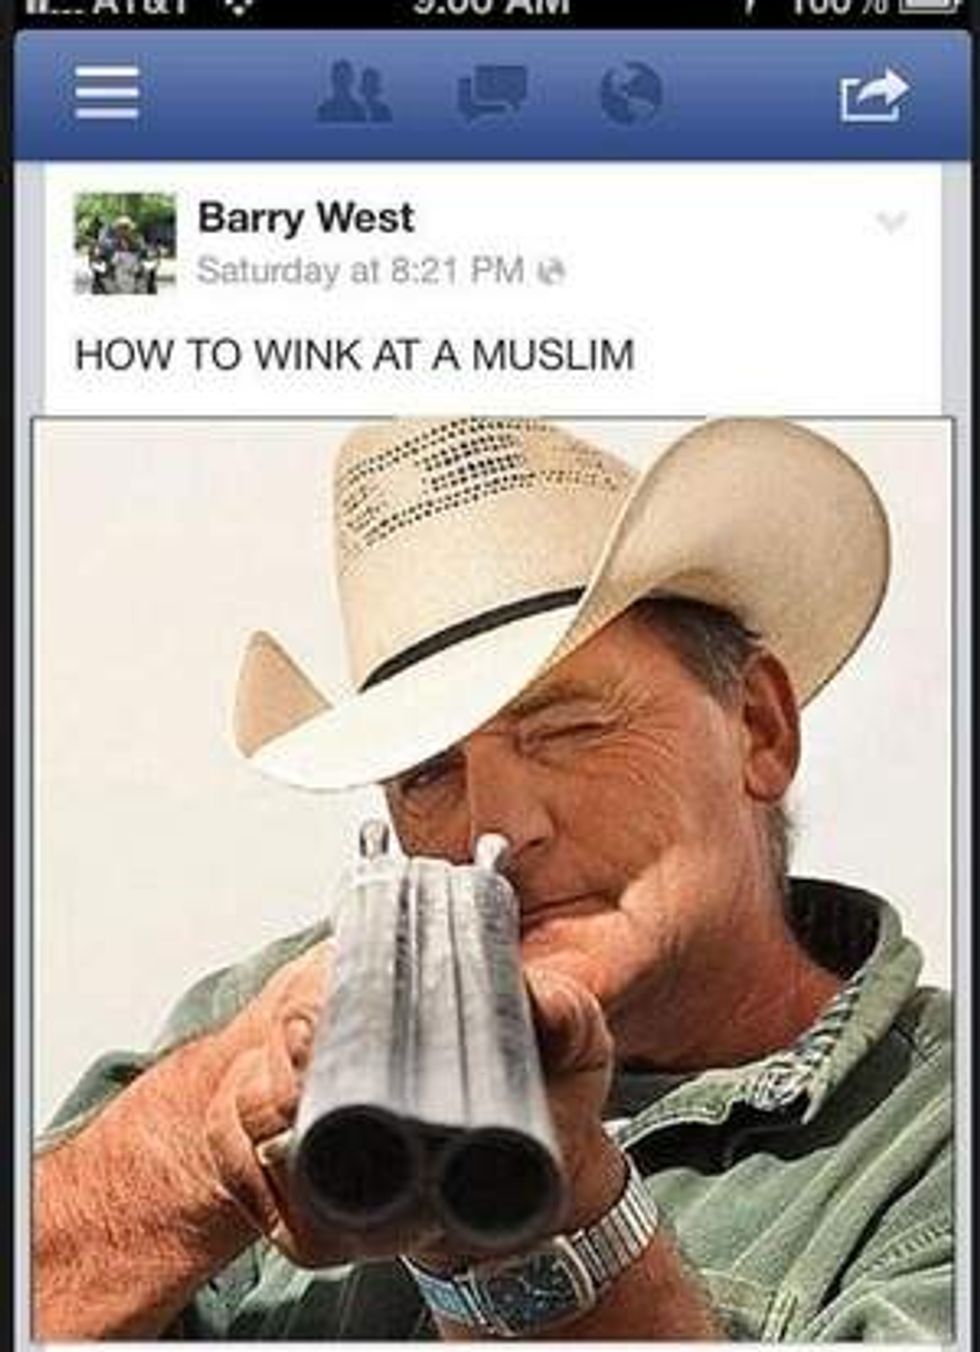 Tennessee Politician Feels Unfairly Criticized For Innocent Let's-Point-Guns-At-Muslims Message